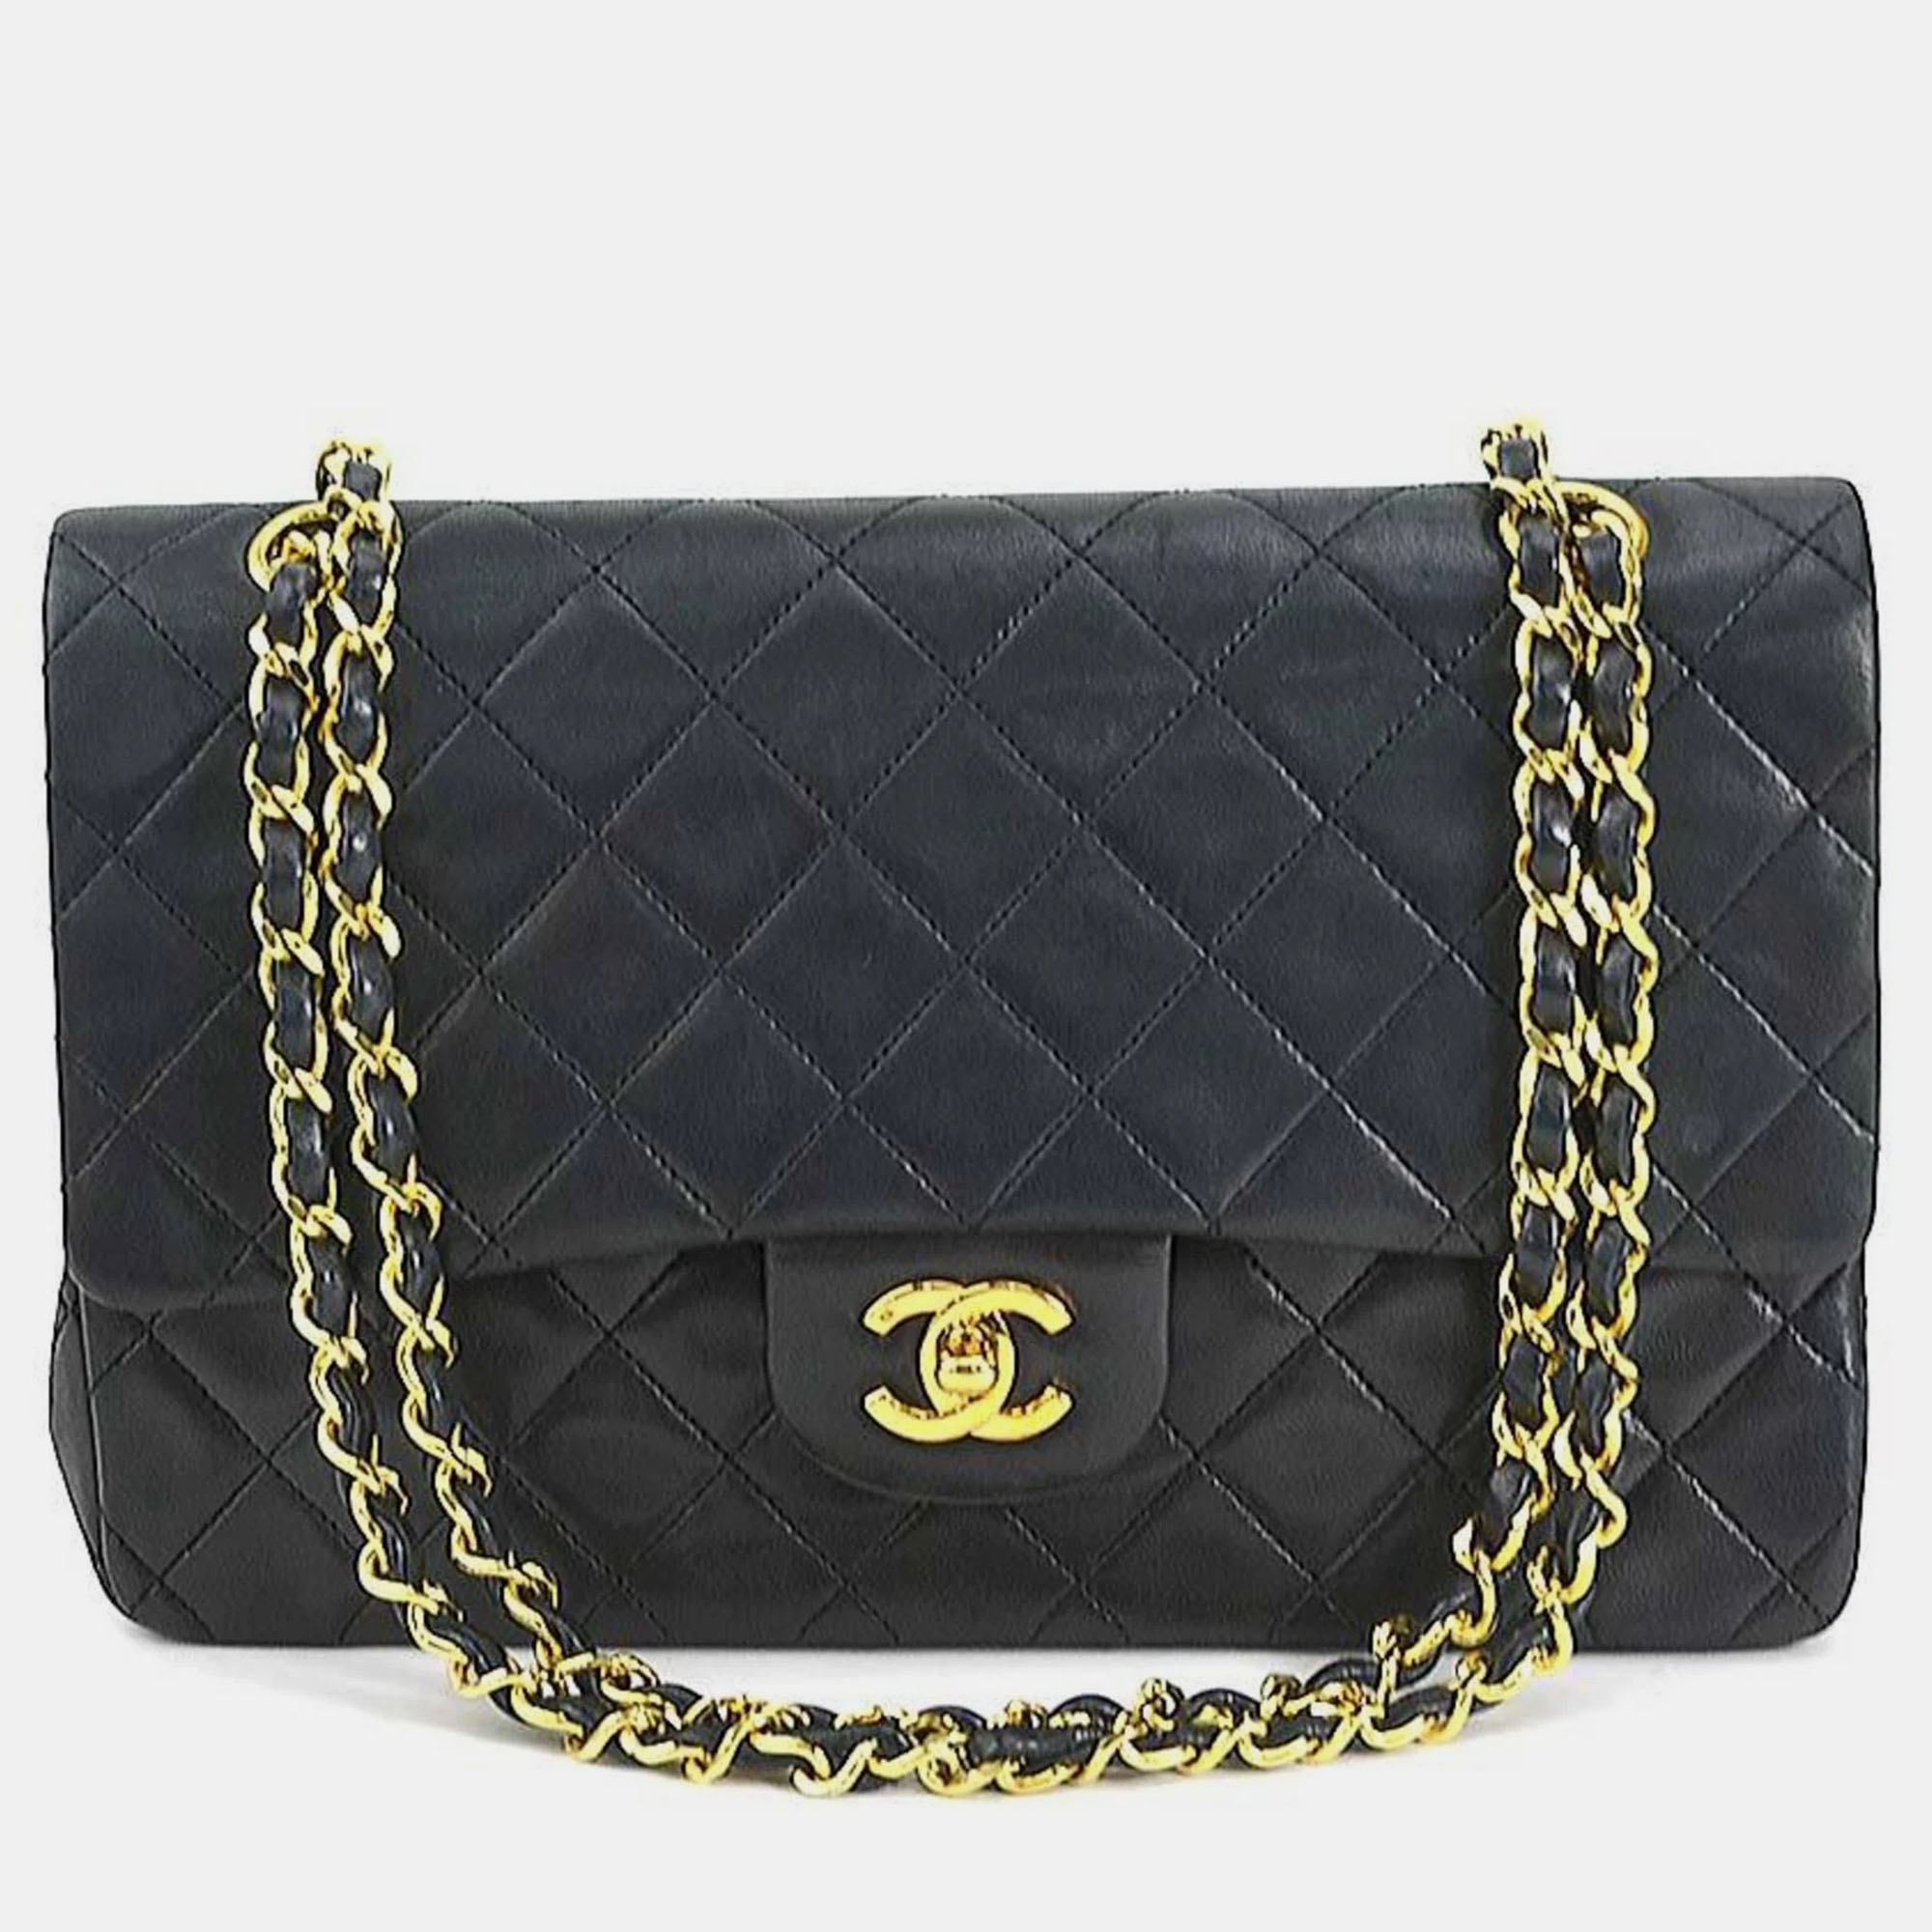 Chanel black lambskin quilted small double flap shoulder bag